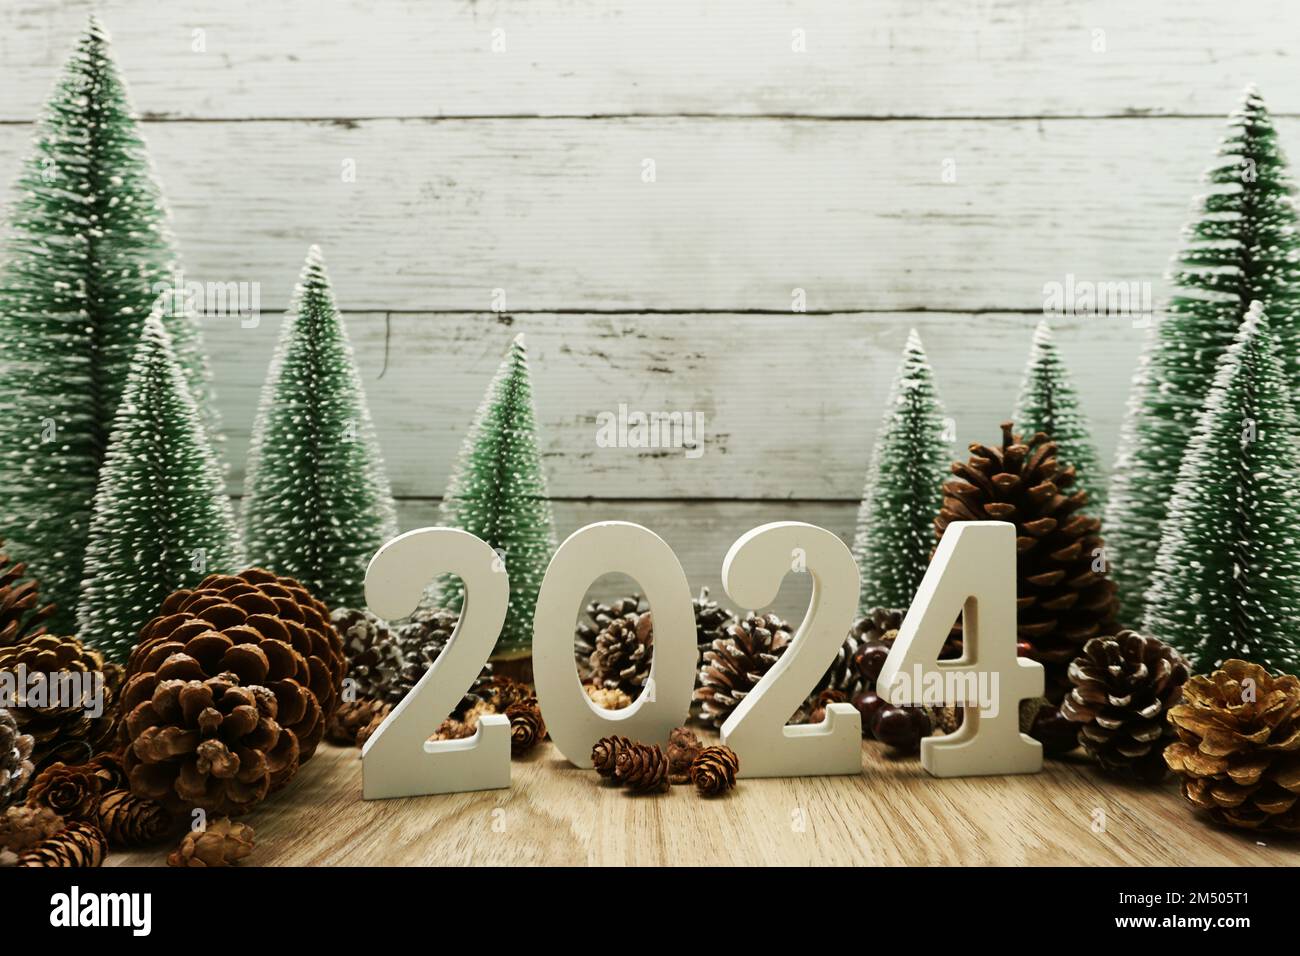 Happy New Year 2024 Decoration With Christmas Tree And Pine Cones On Wooden Background 2M505T1 